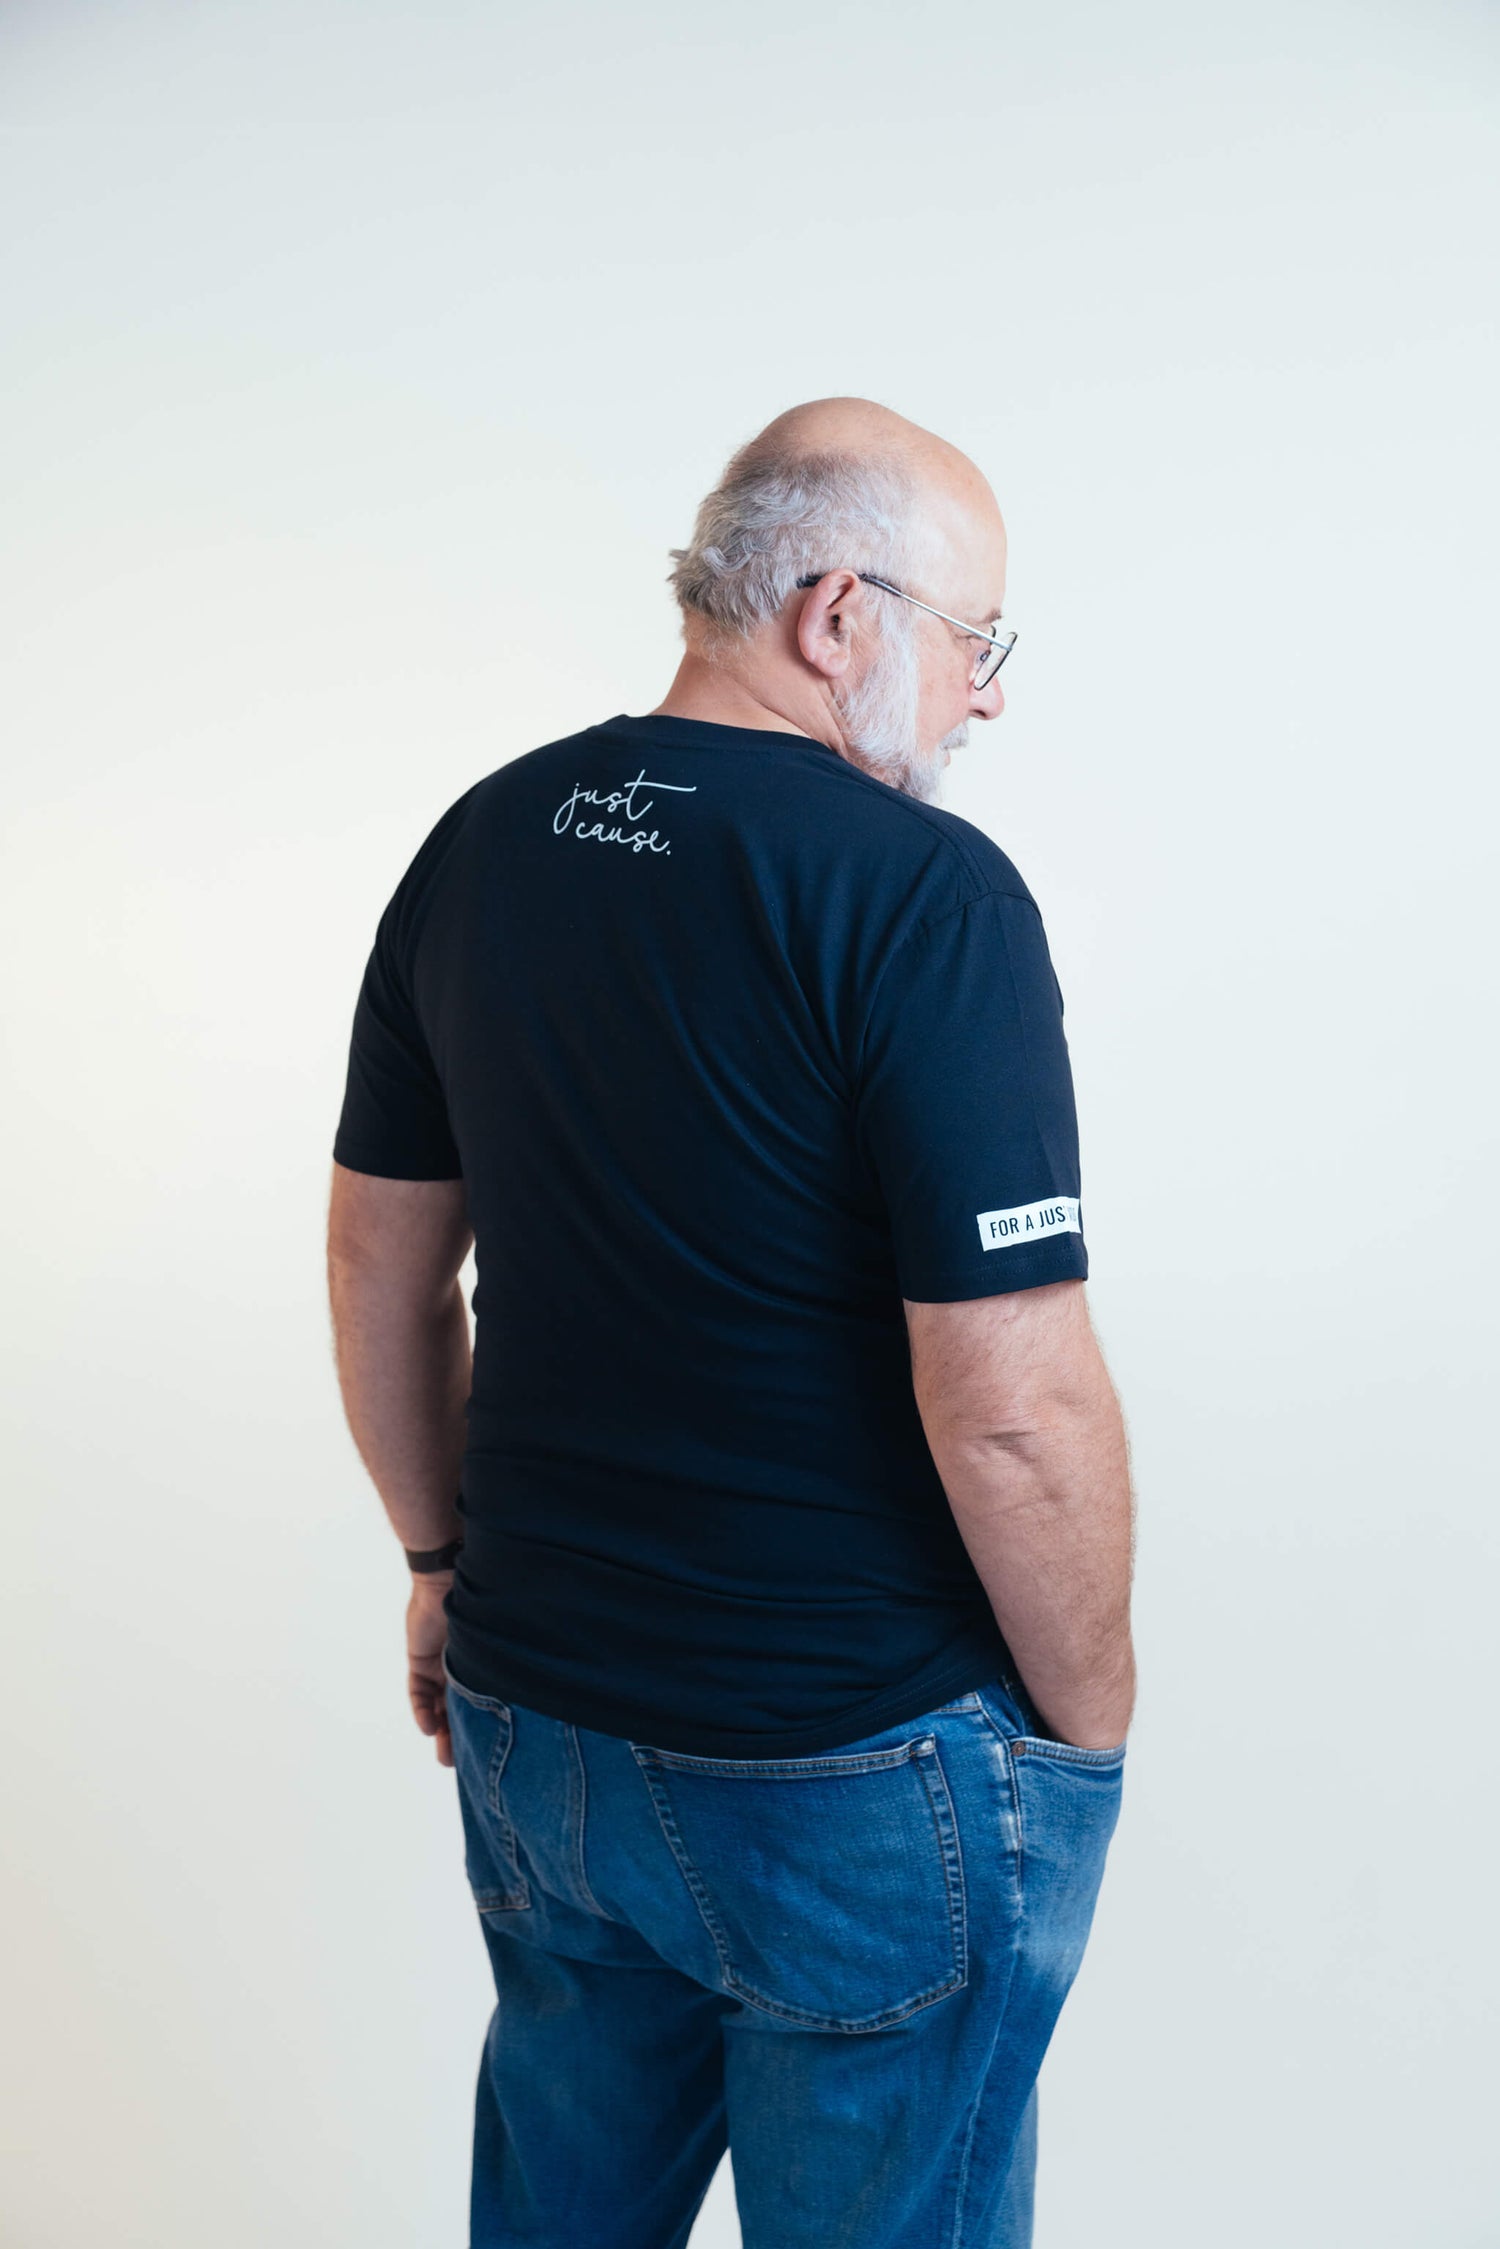 Steve, facing away from the camera wearing an ink blue tshirt with the Just Cause logo on the back and the words 'For a Just World' on the armsleeve written in white.